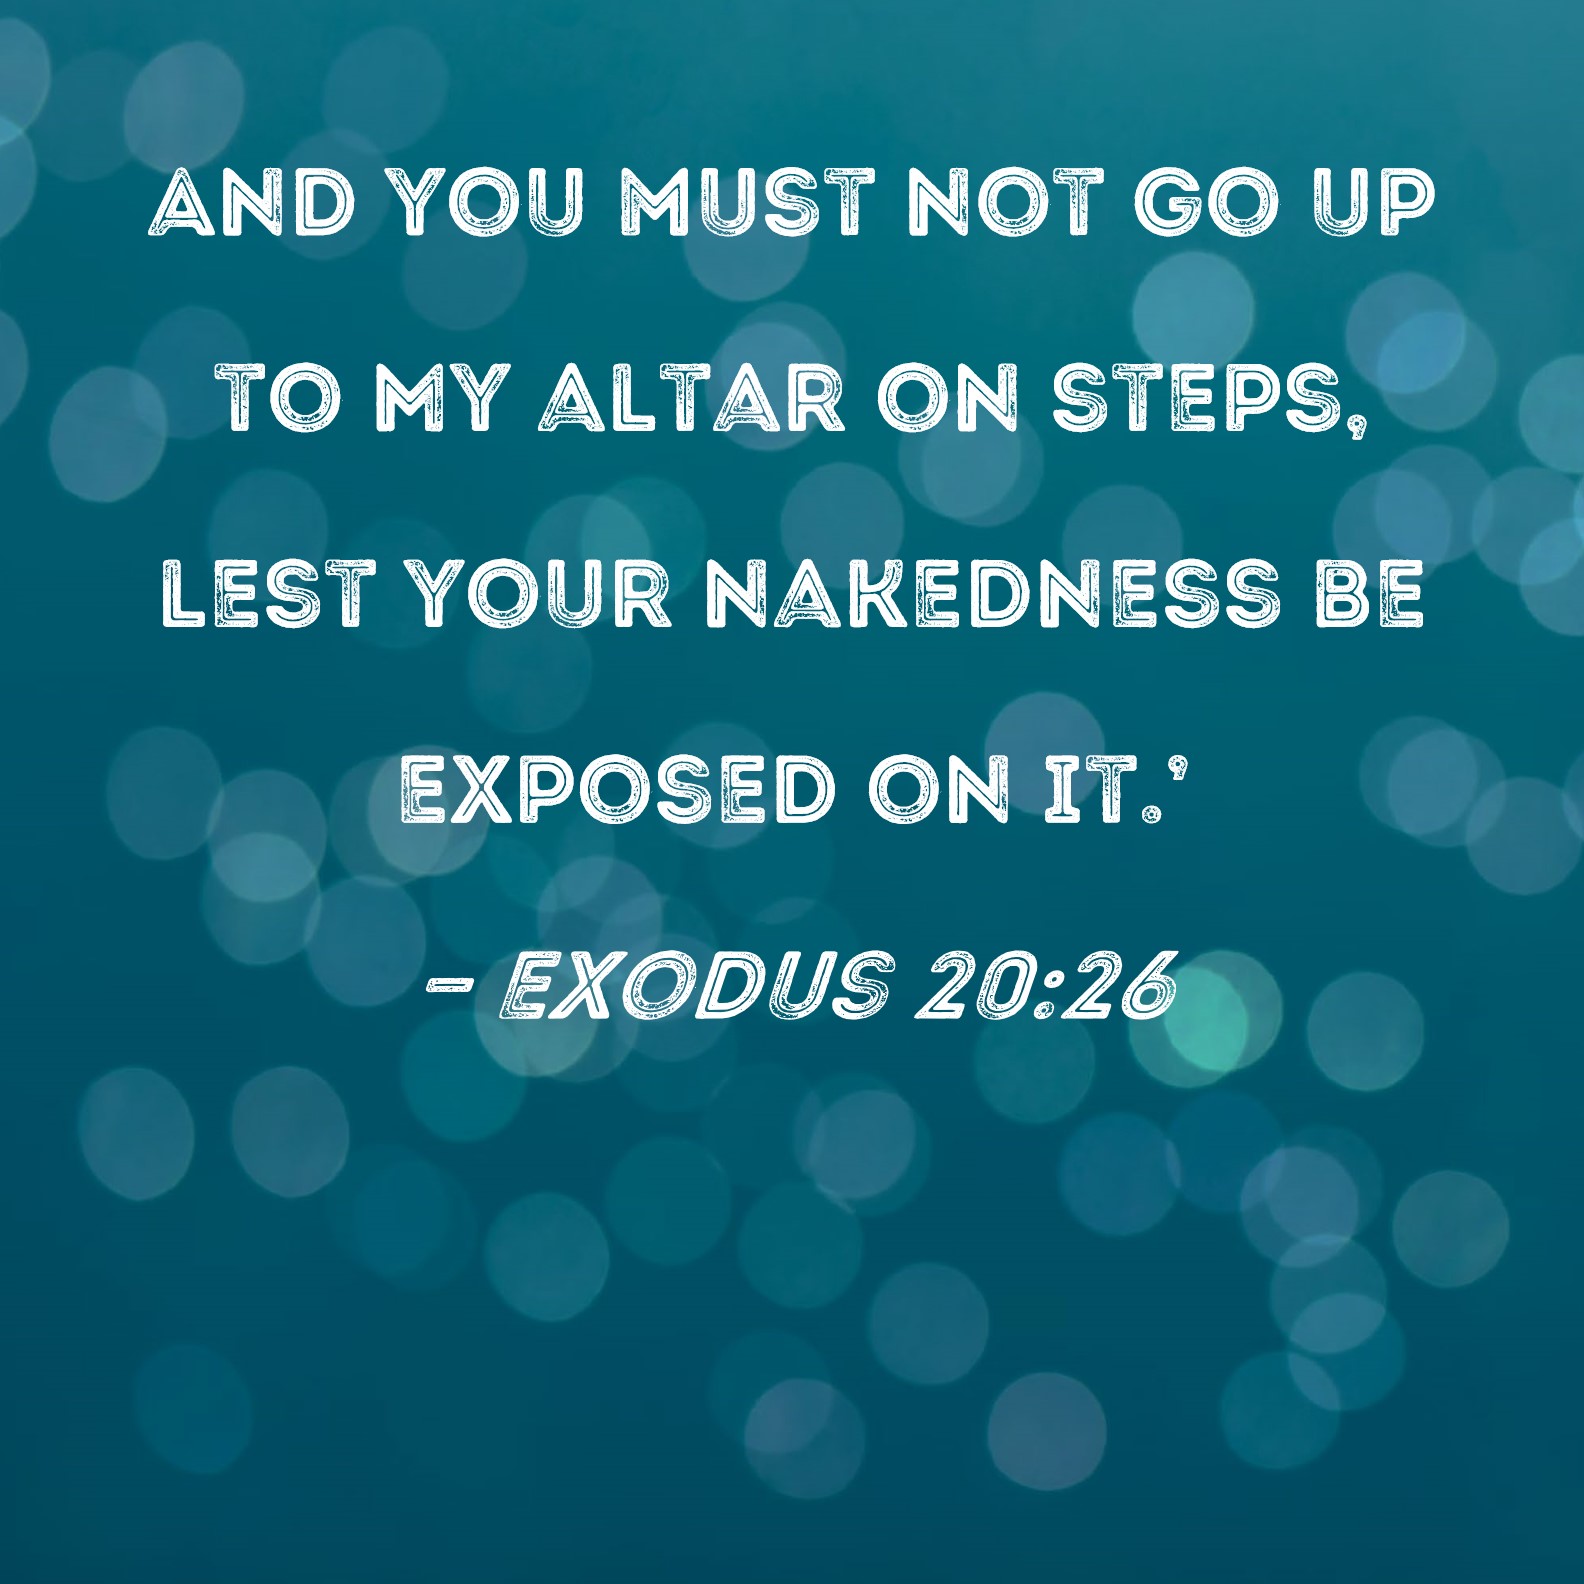 Exodus And You Must Not Go Up To My Altar On Steps Lest Your Nakedness Be Exposed On It